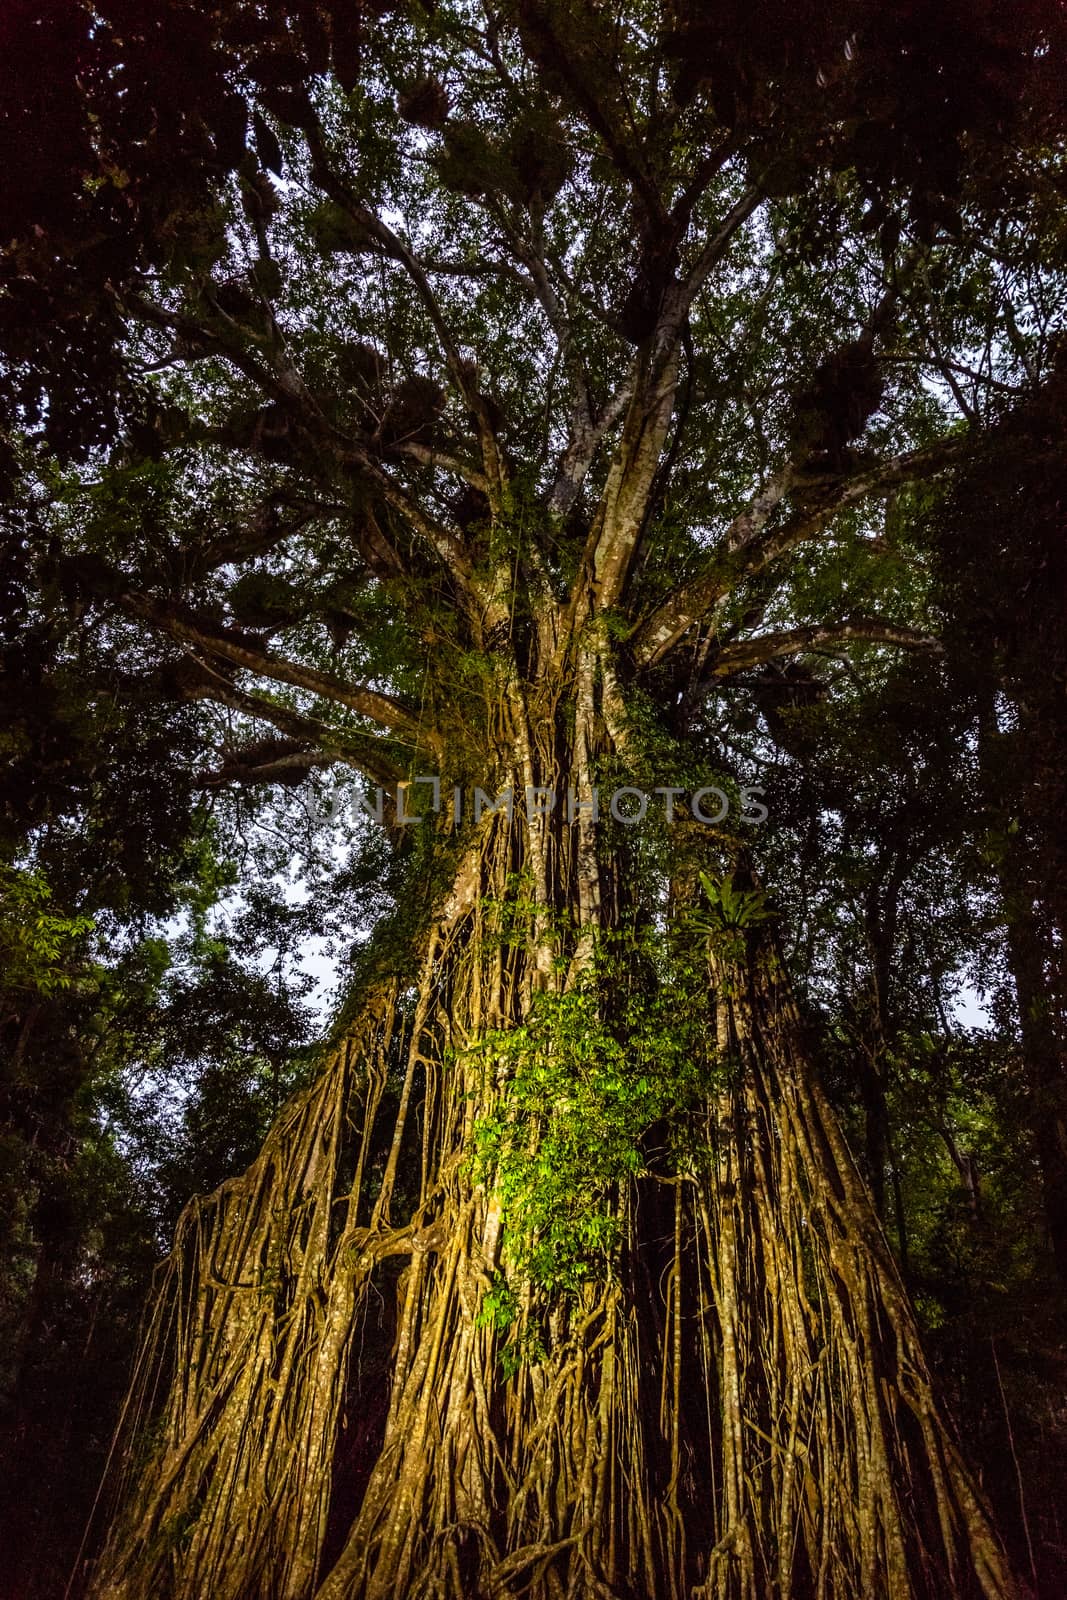 Australian strangler fig tree painted with light at dusk by mauricallari